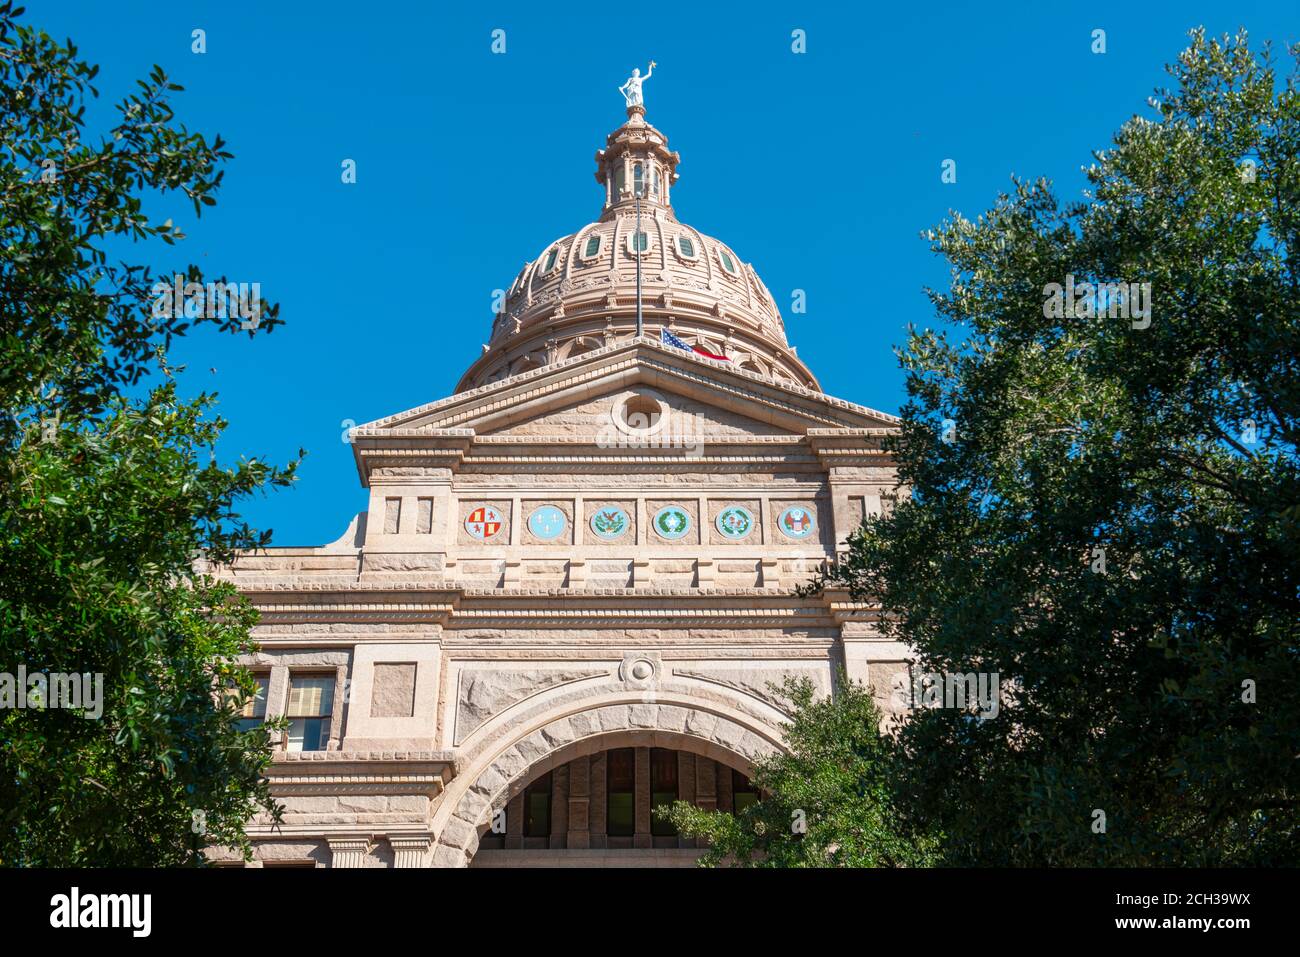 Texas State Capitol is the capitol building and seat of government of Texas in downtown Austin, Texas TX, USA. Stock Photo